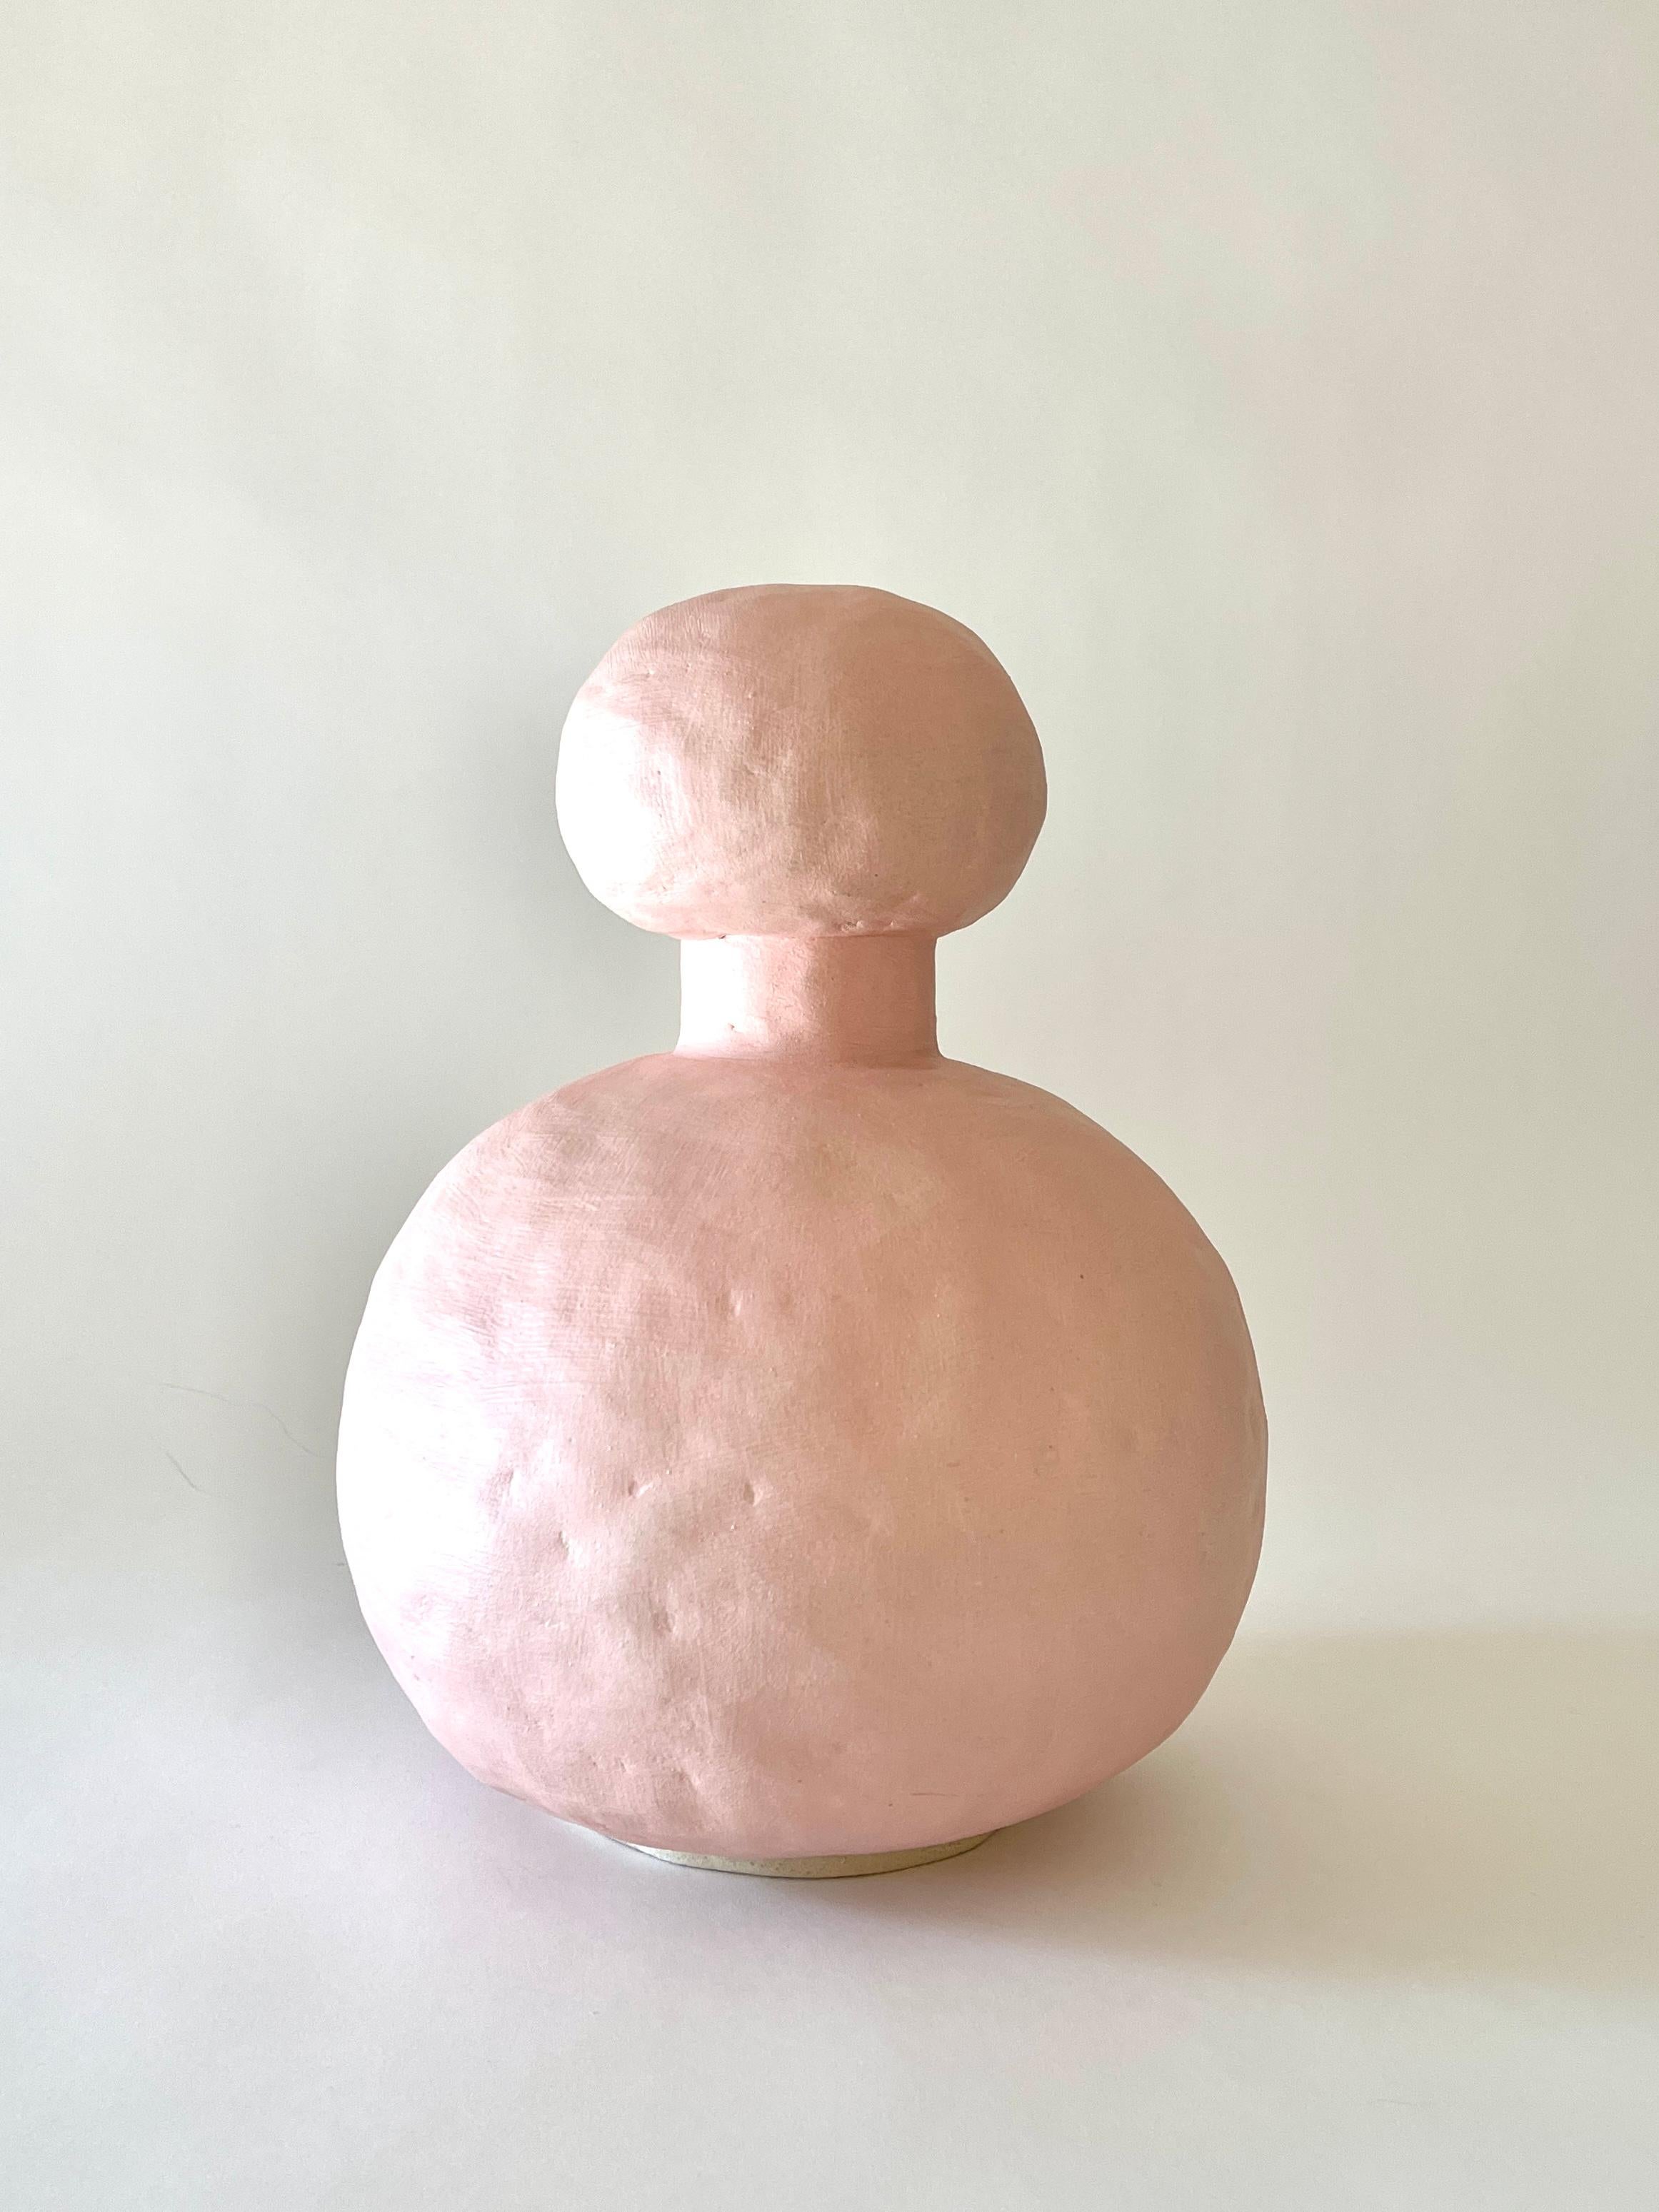 Jules pink vase by Meg Morrison
Materials: Ceramic.
Dimensions: Ø 23 x H 32 cm.

Available in Black, White, Yellow and Pink finishes. All sizes are approximate. Although vases are watertight condensation may form on the bottom. Please protect